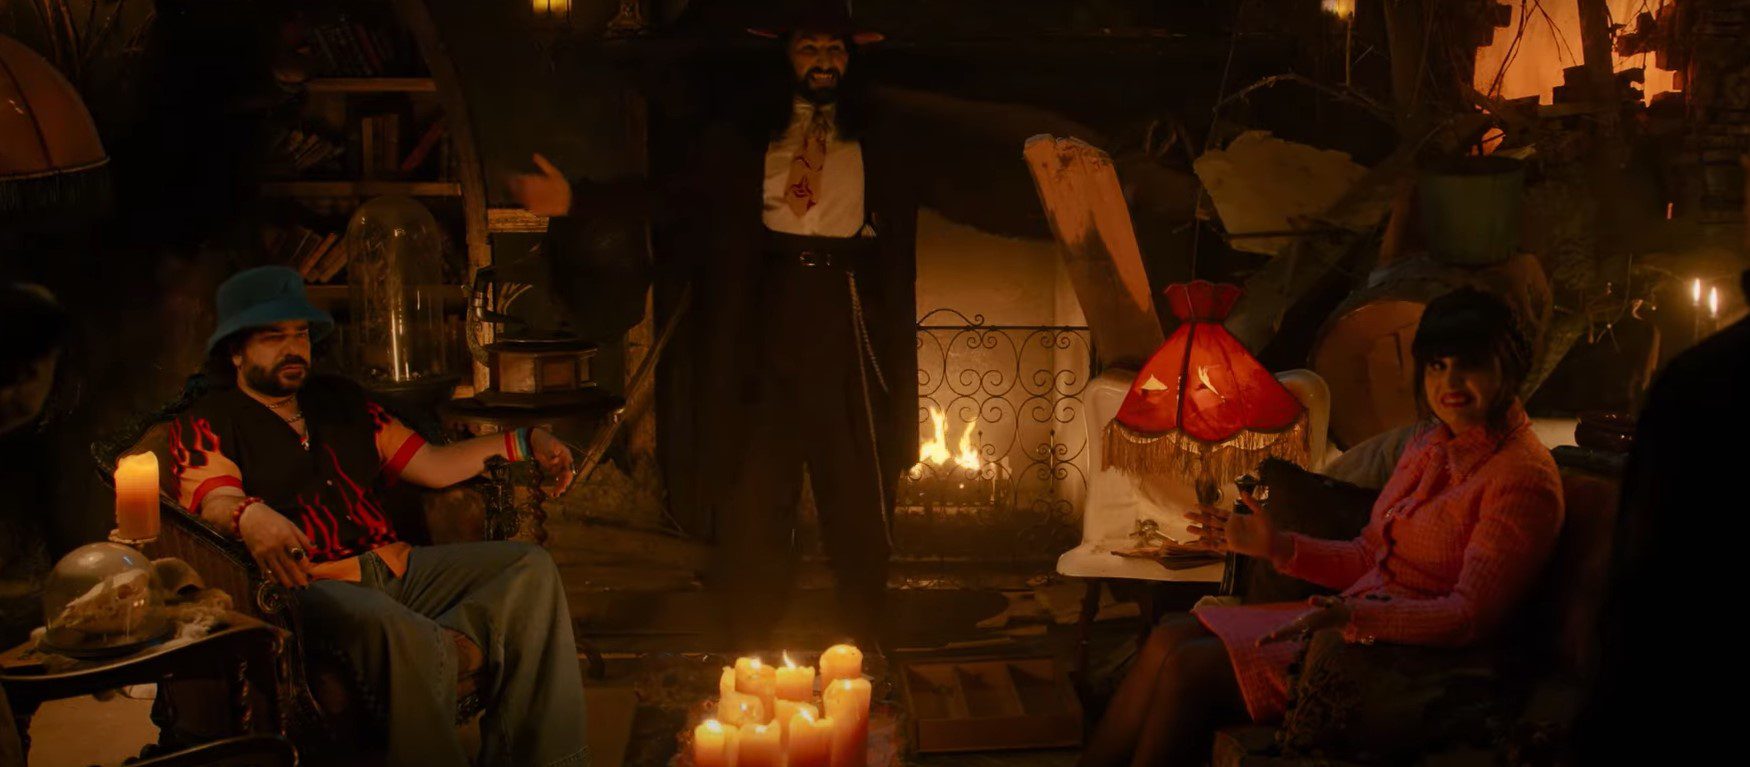 What We Do In The Shadows Season 4 Episode 5